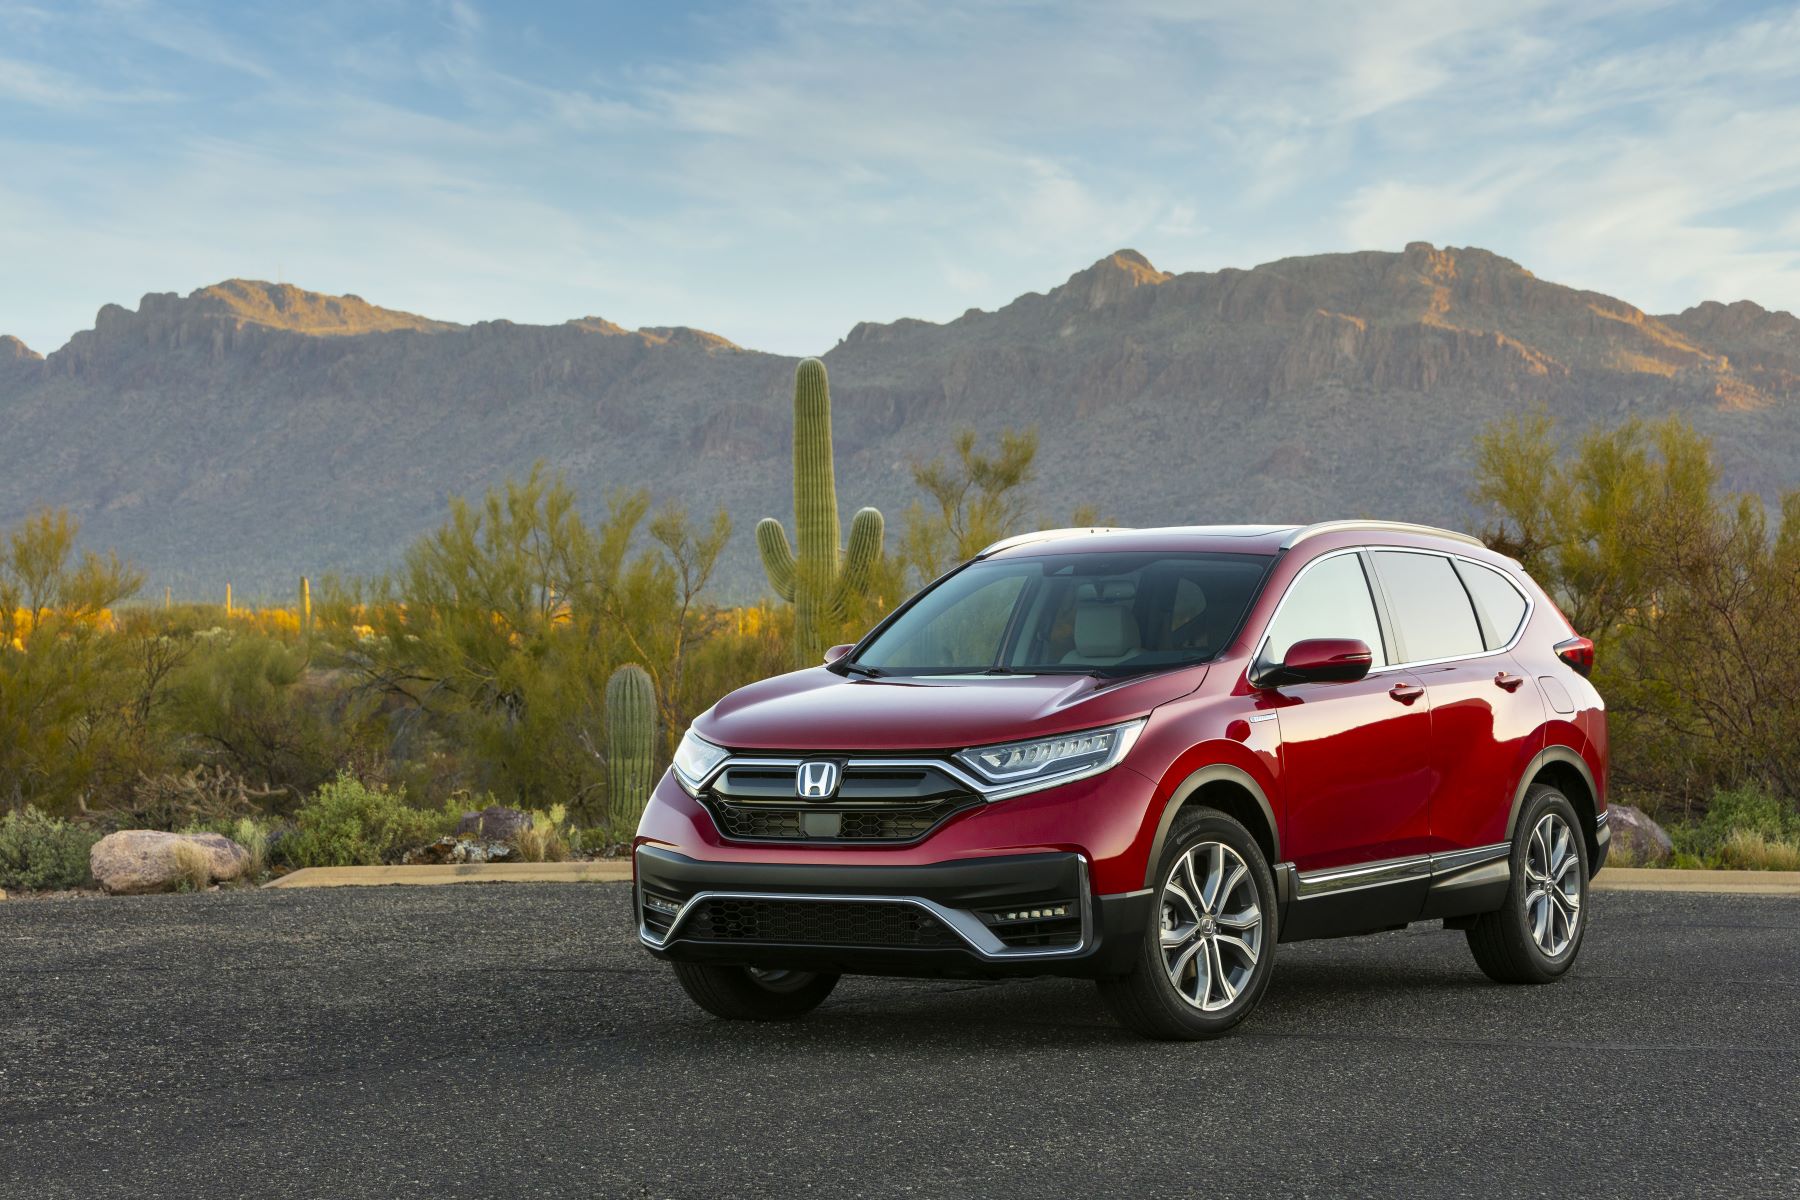 A red 2022 Honda CR-V Hybrid compact SUV model parked on an asphalt lot in the desert near cliffs and cactus